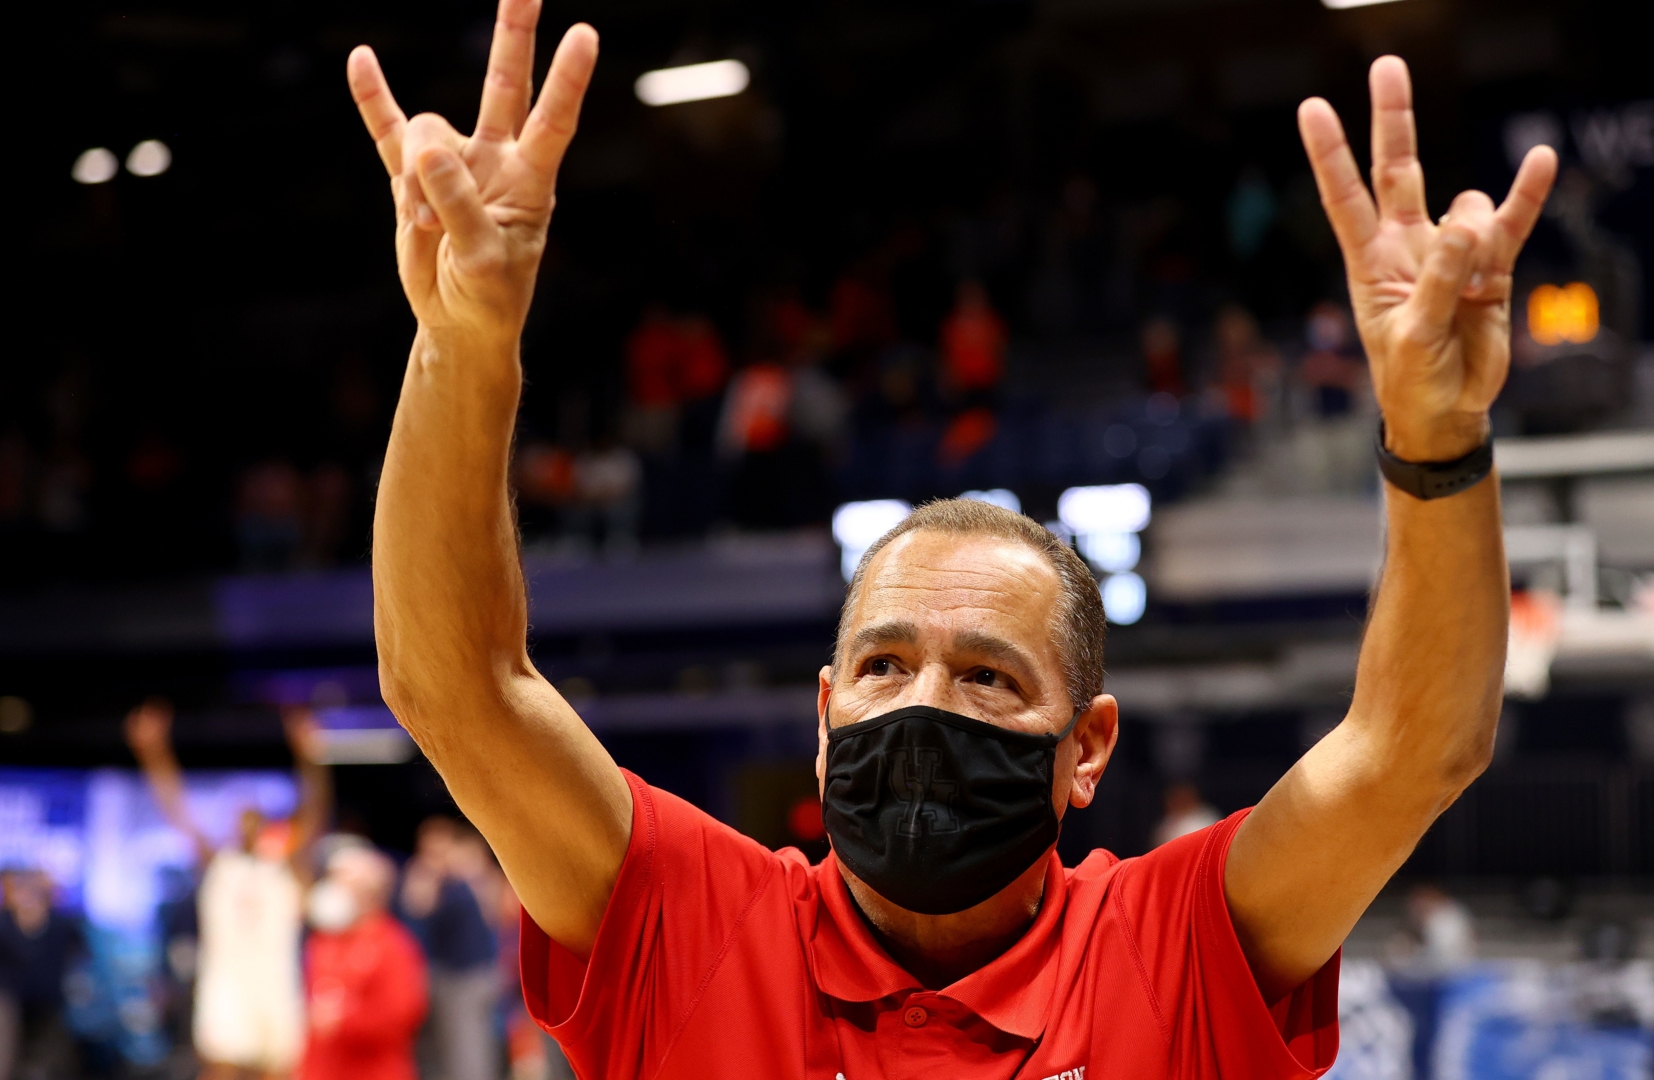 UH head coach Kelvin Sampson in the Sweet Sixteen round of the 2021 NCAA Division I Men’s Basketball Tournament held at Hinkle Fieldhouse on March 27, 2021 in Indianapolis, Indiana. | Photo by Jamie Schwaberow/NCAA Photos via Getty Images